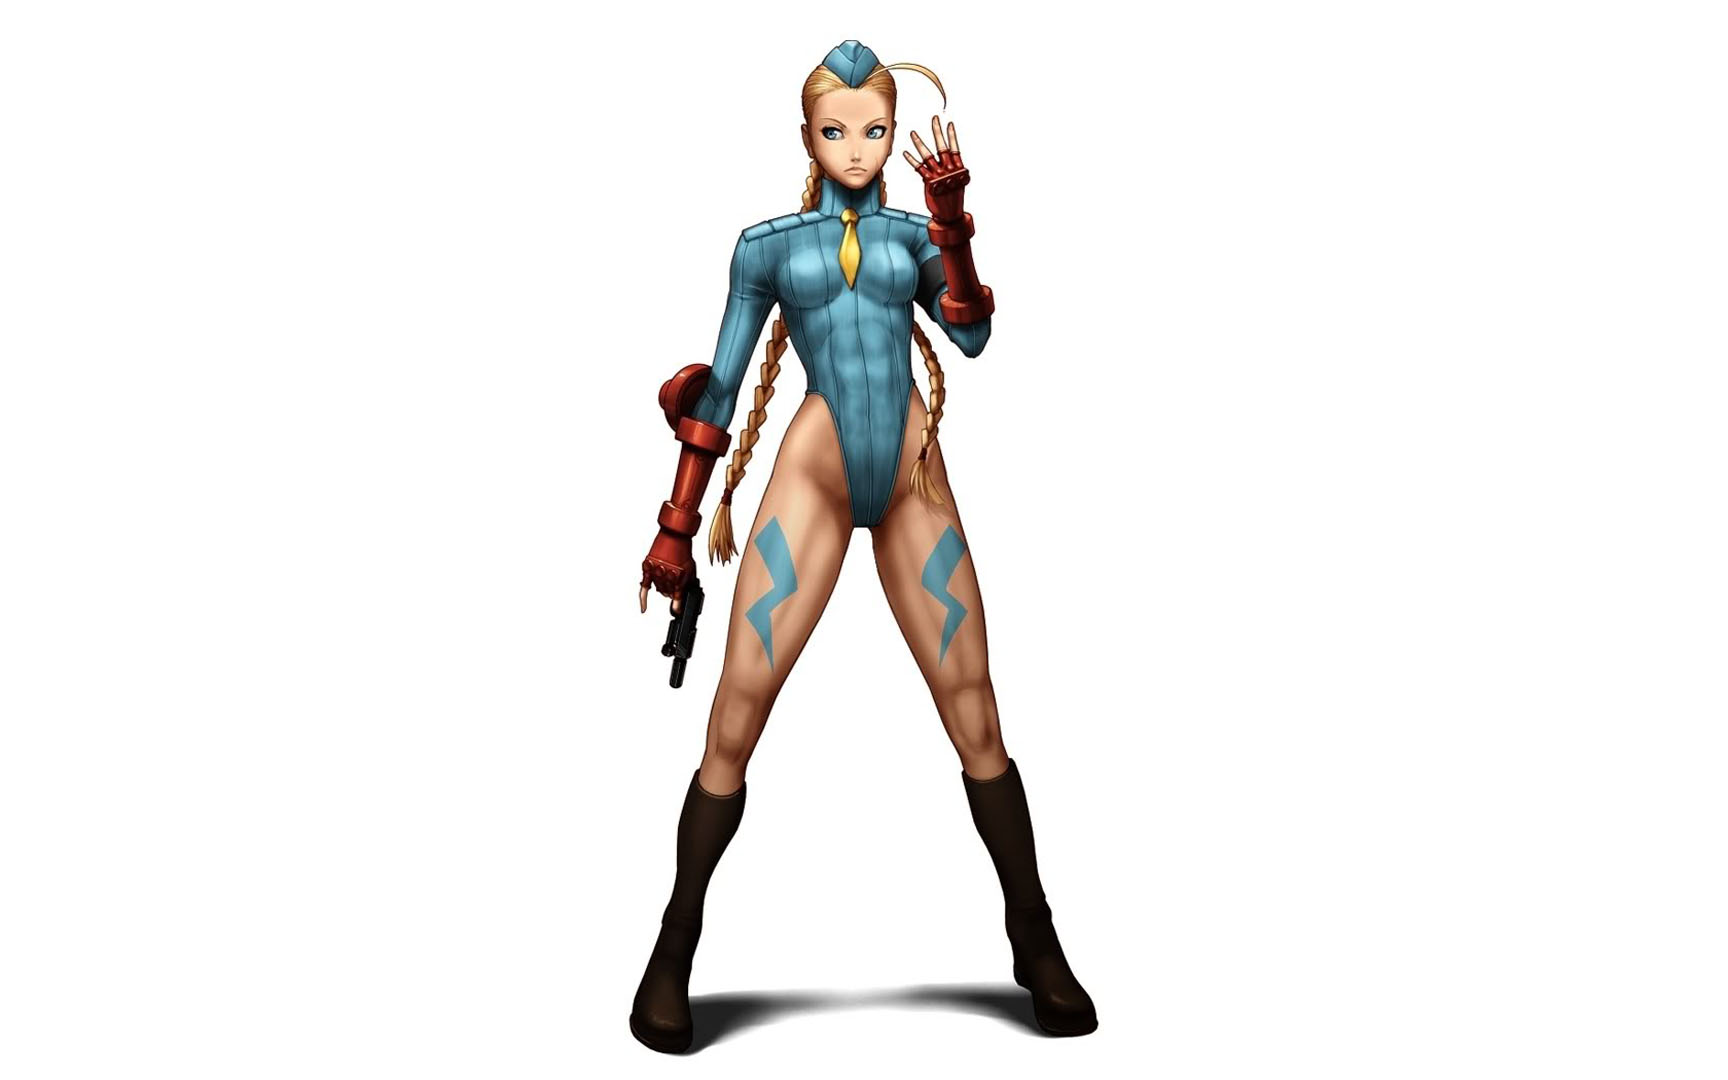 Cammy Fighting Games Wallpaper Image Featuring Street Fighter Iv